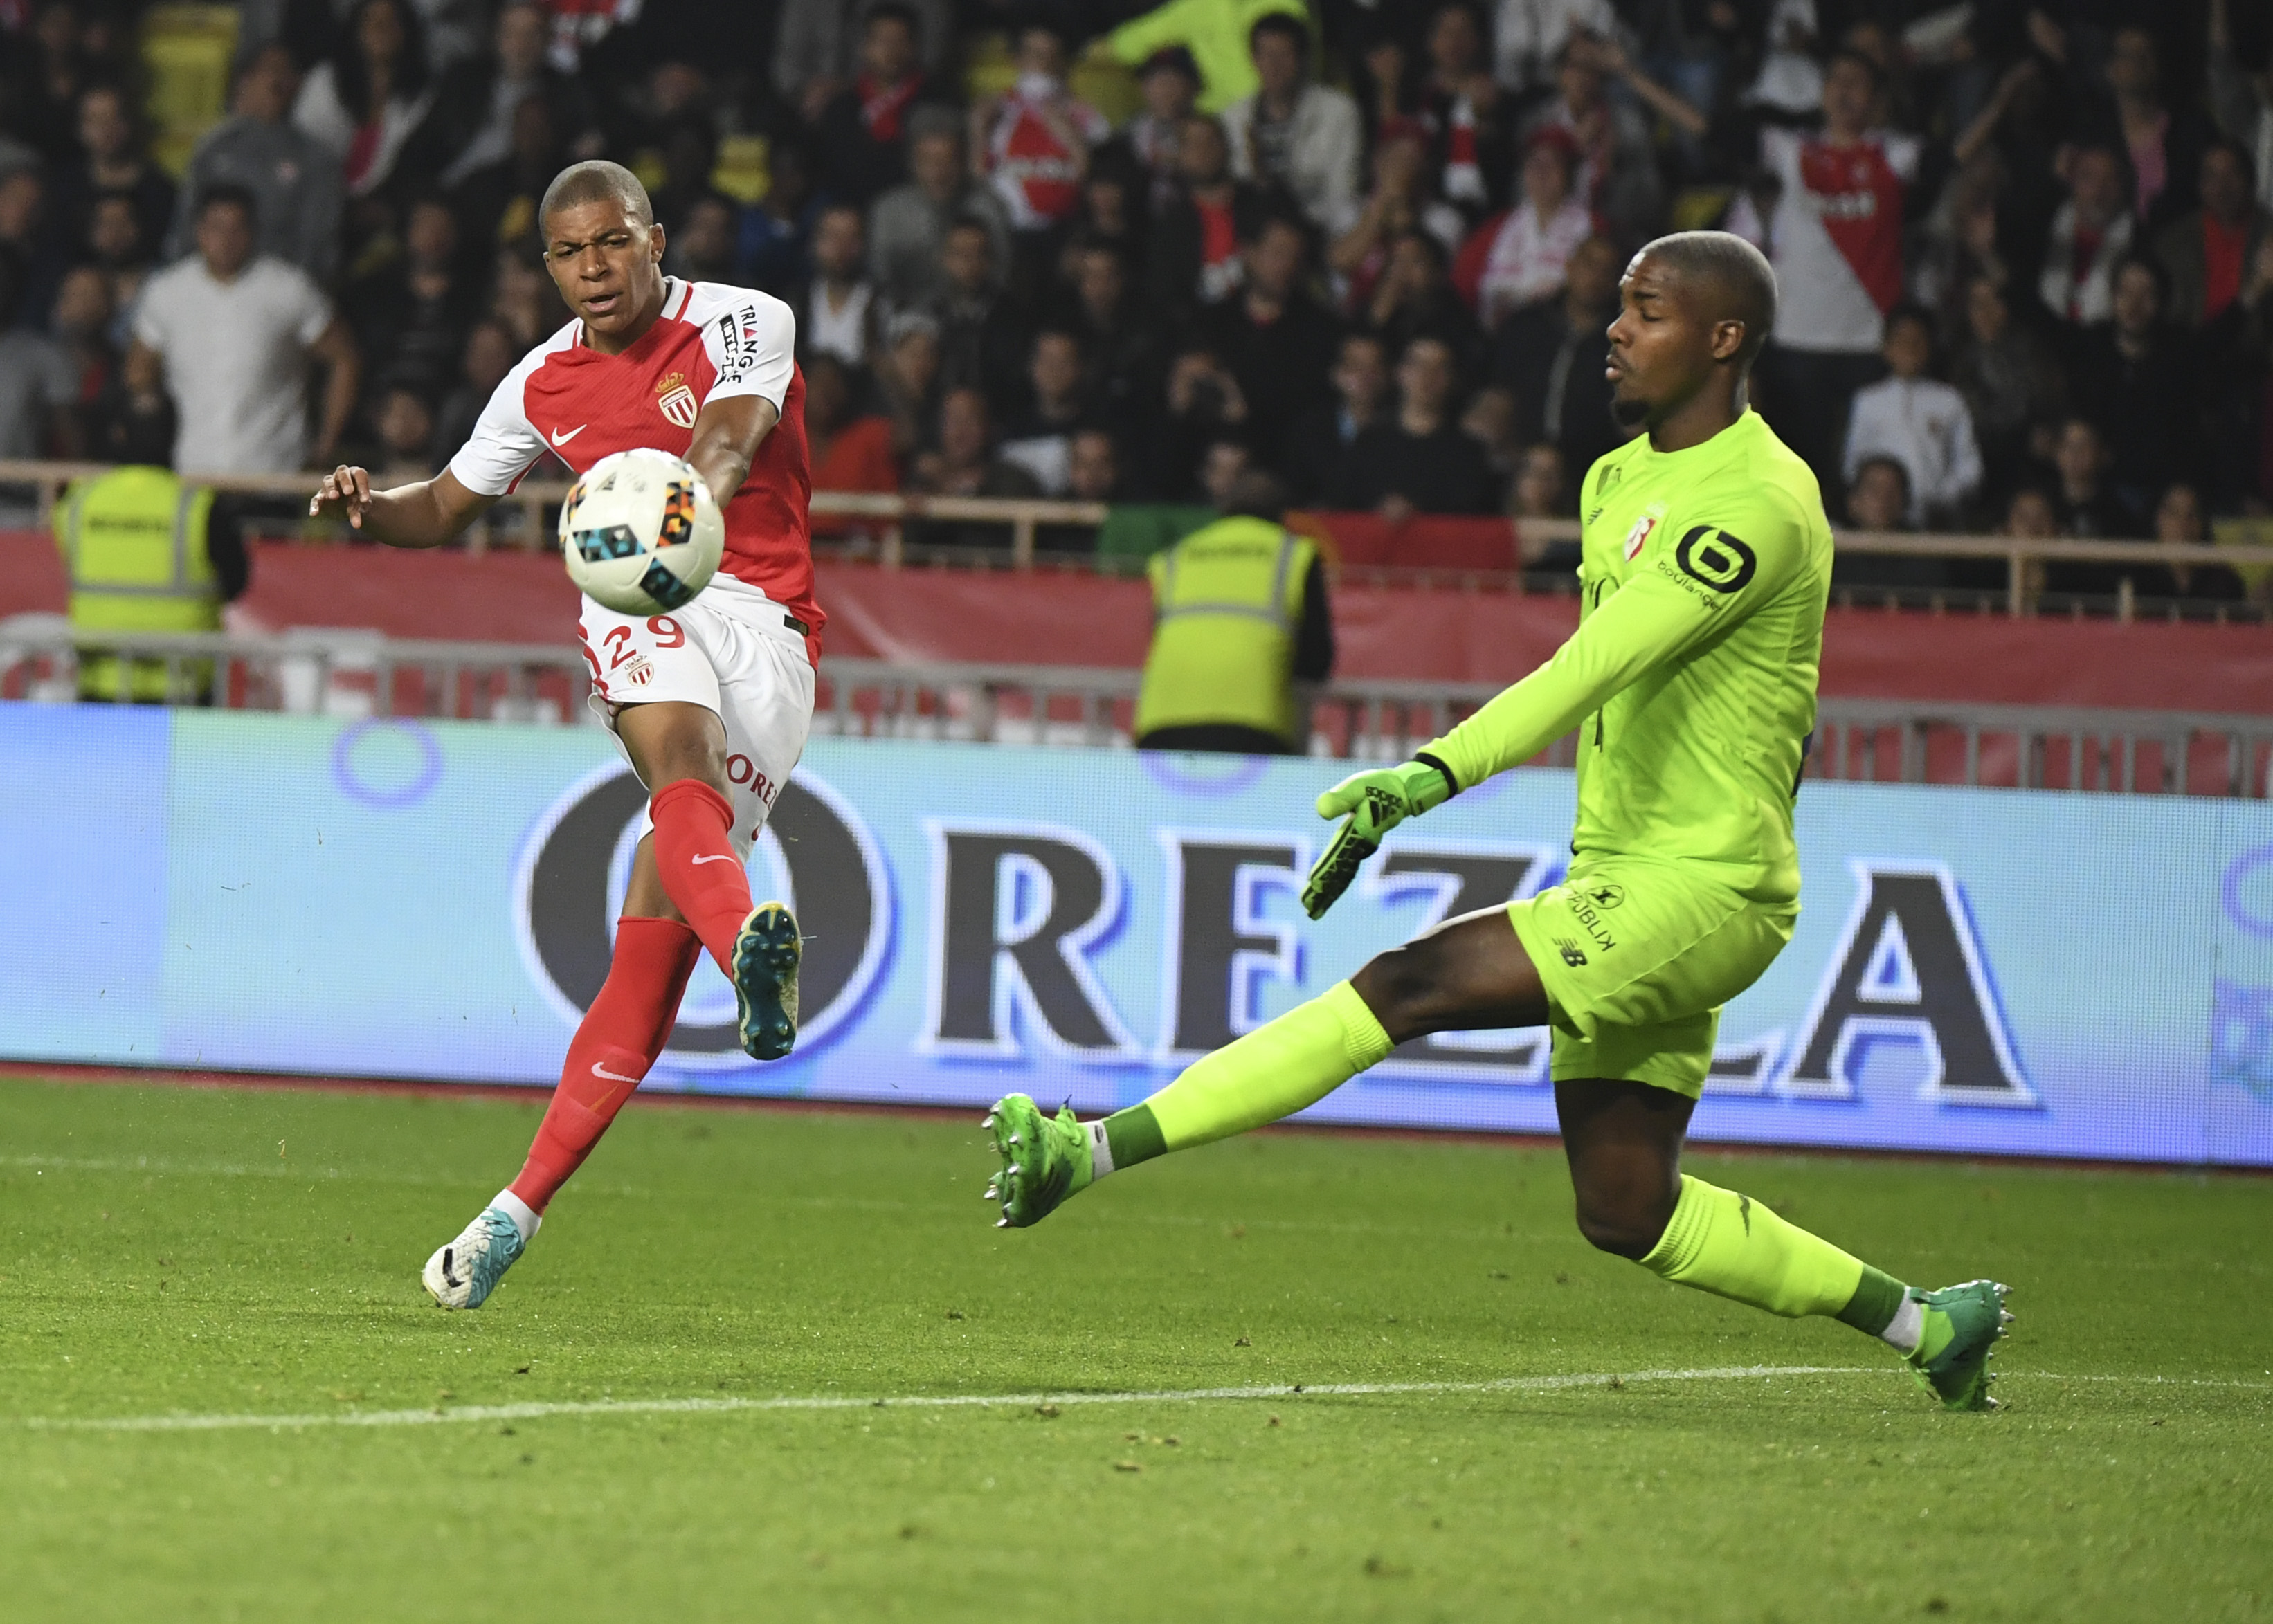 Monaco's French forward Kylian Mbappe Lottin kicks the ball  during the French L1 football match between Monaco (ASM) and Lille (LOSC) at the Louis II Stadium in Monaco on May 14,2017. / AFP PHOTO / Yann COATSALIOU        (Photo credit should read YANN COATSALIOU/AFP/Getty Images)